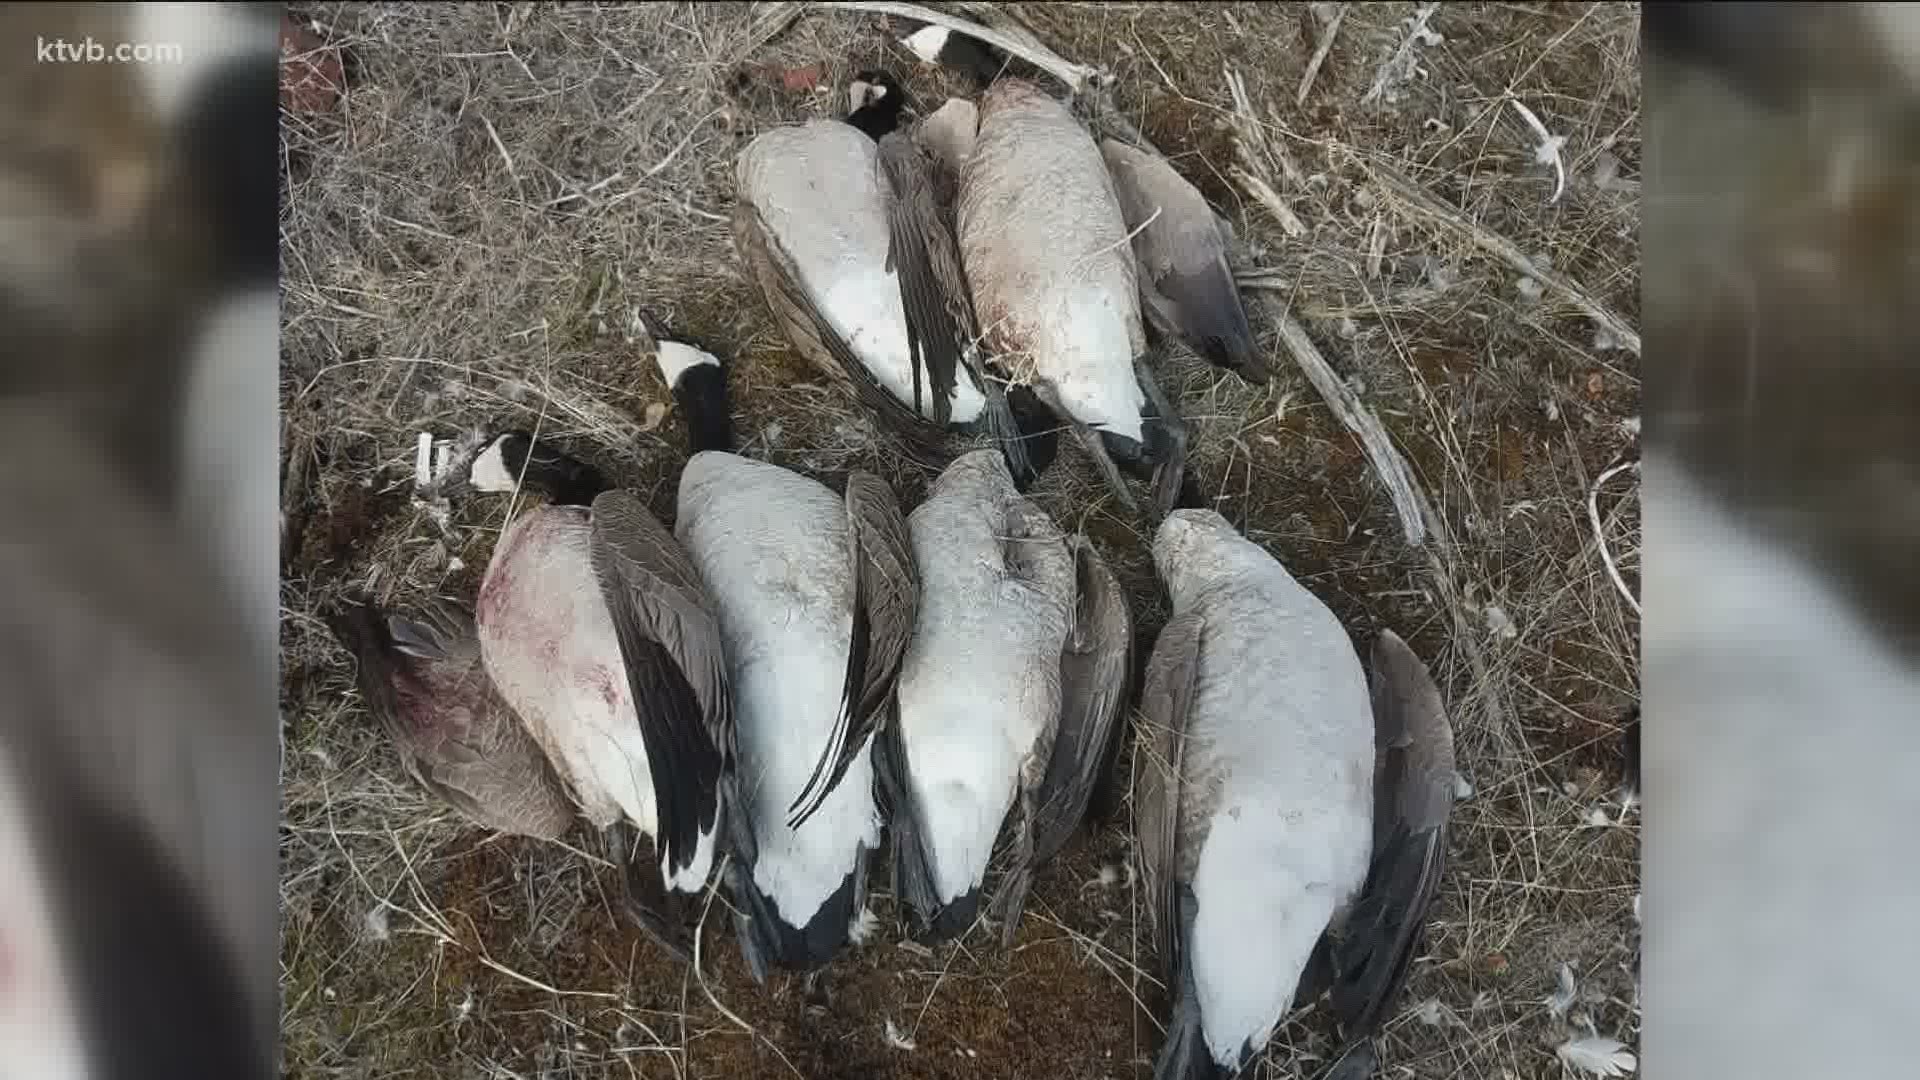 The six geese were found in the same spot in Minidoka County where nine geese were dumped in December.